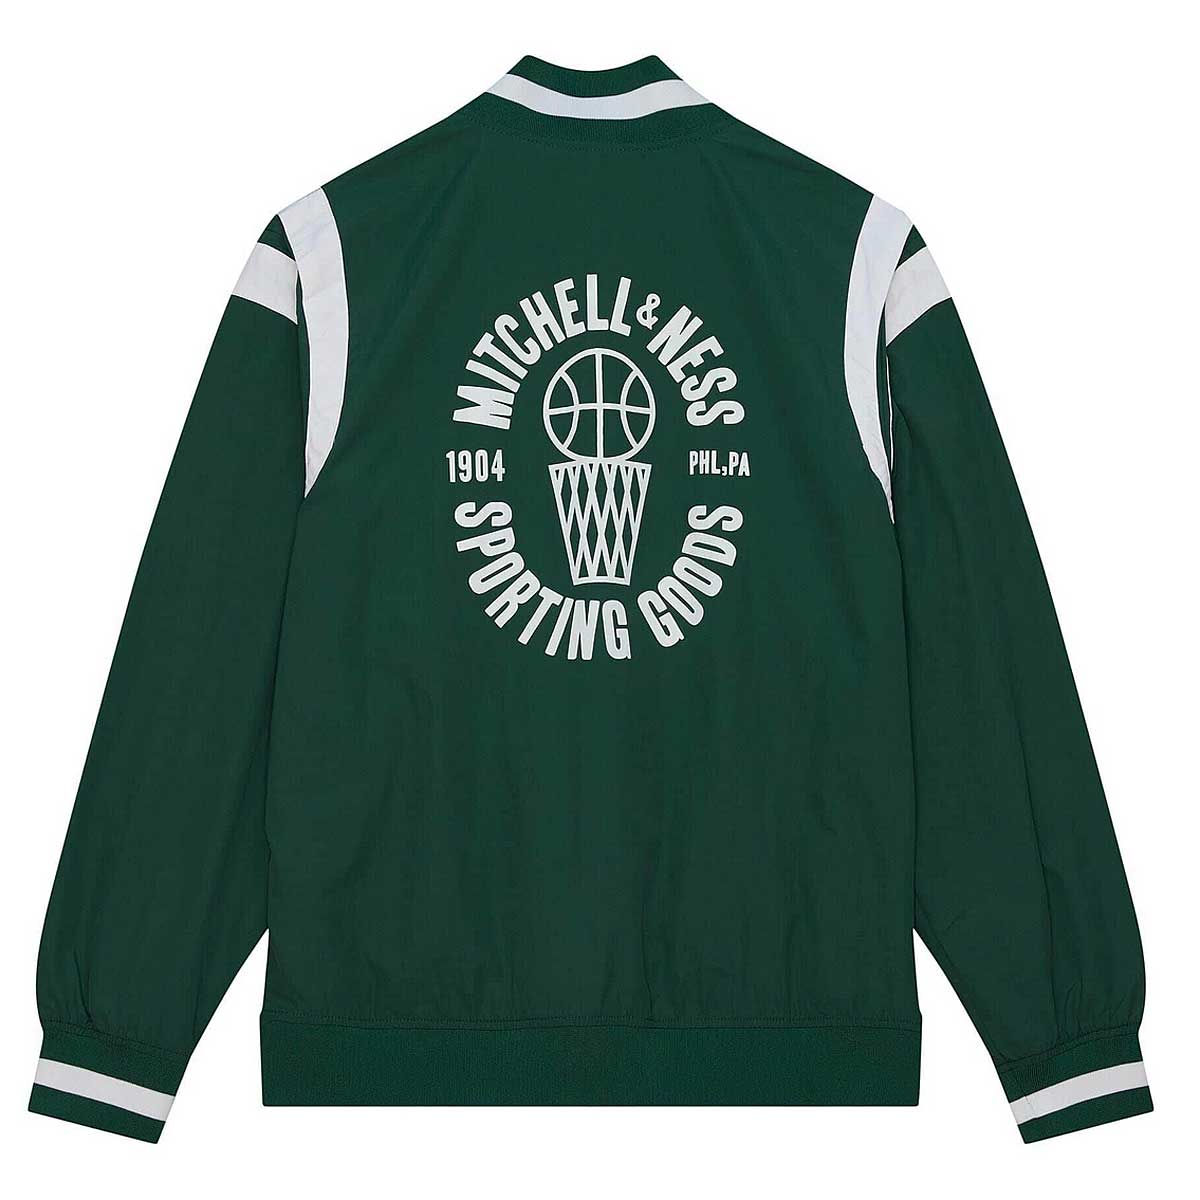 Mitchell And Ness Warm Up Jacket, Green/White